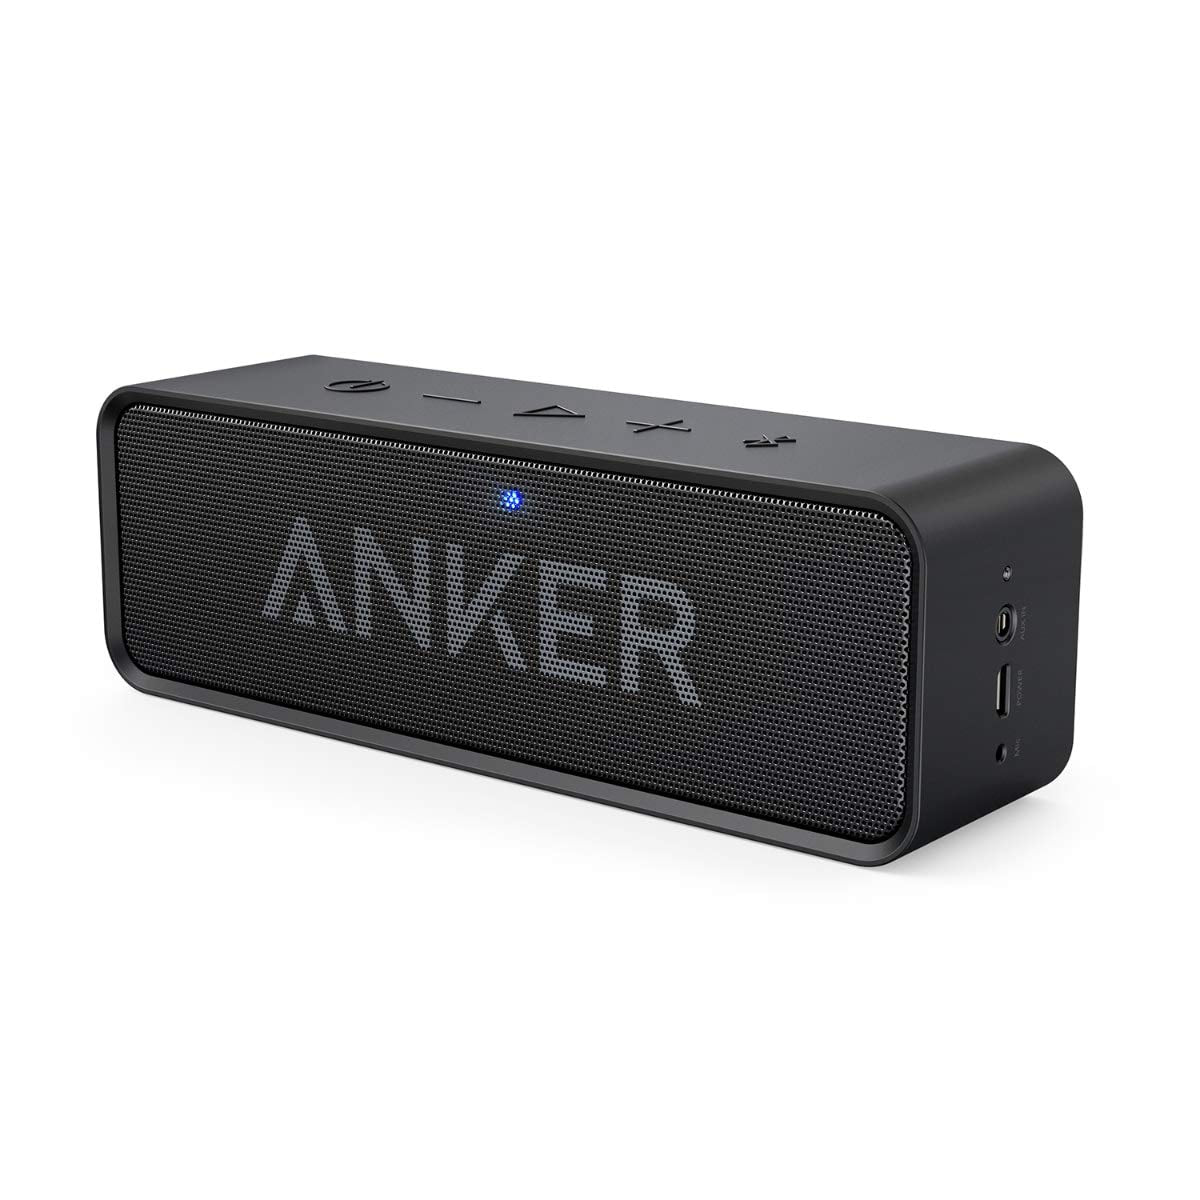 Anker Soundcore Bluetooth Speaker Upgraded Version with Stereo Sound, BassUp Technology, 24H Playtime, Built-in Mic, Portable Wireless Speaker(Renewed)